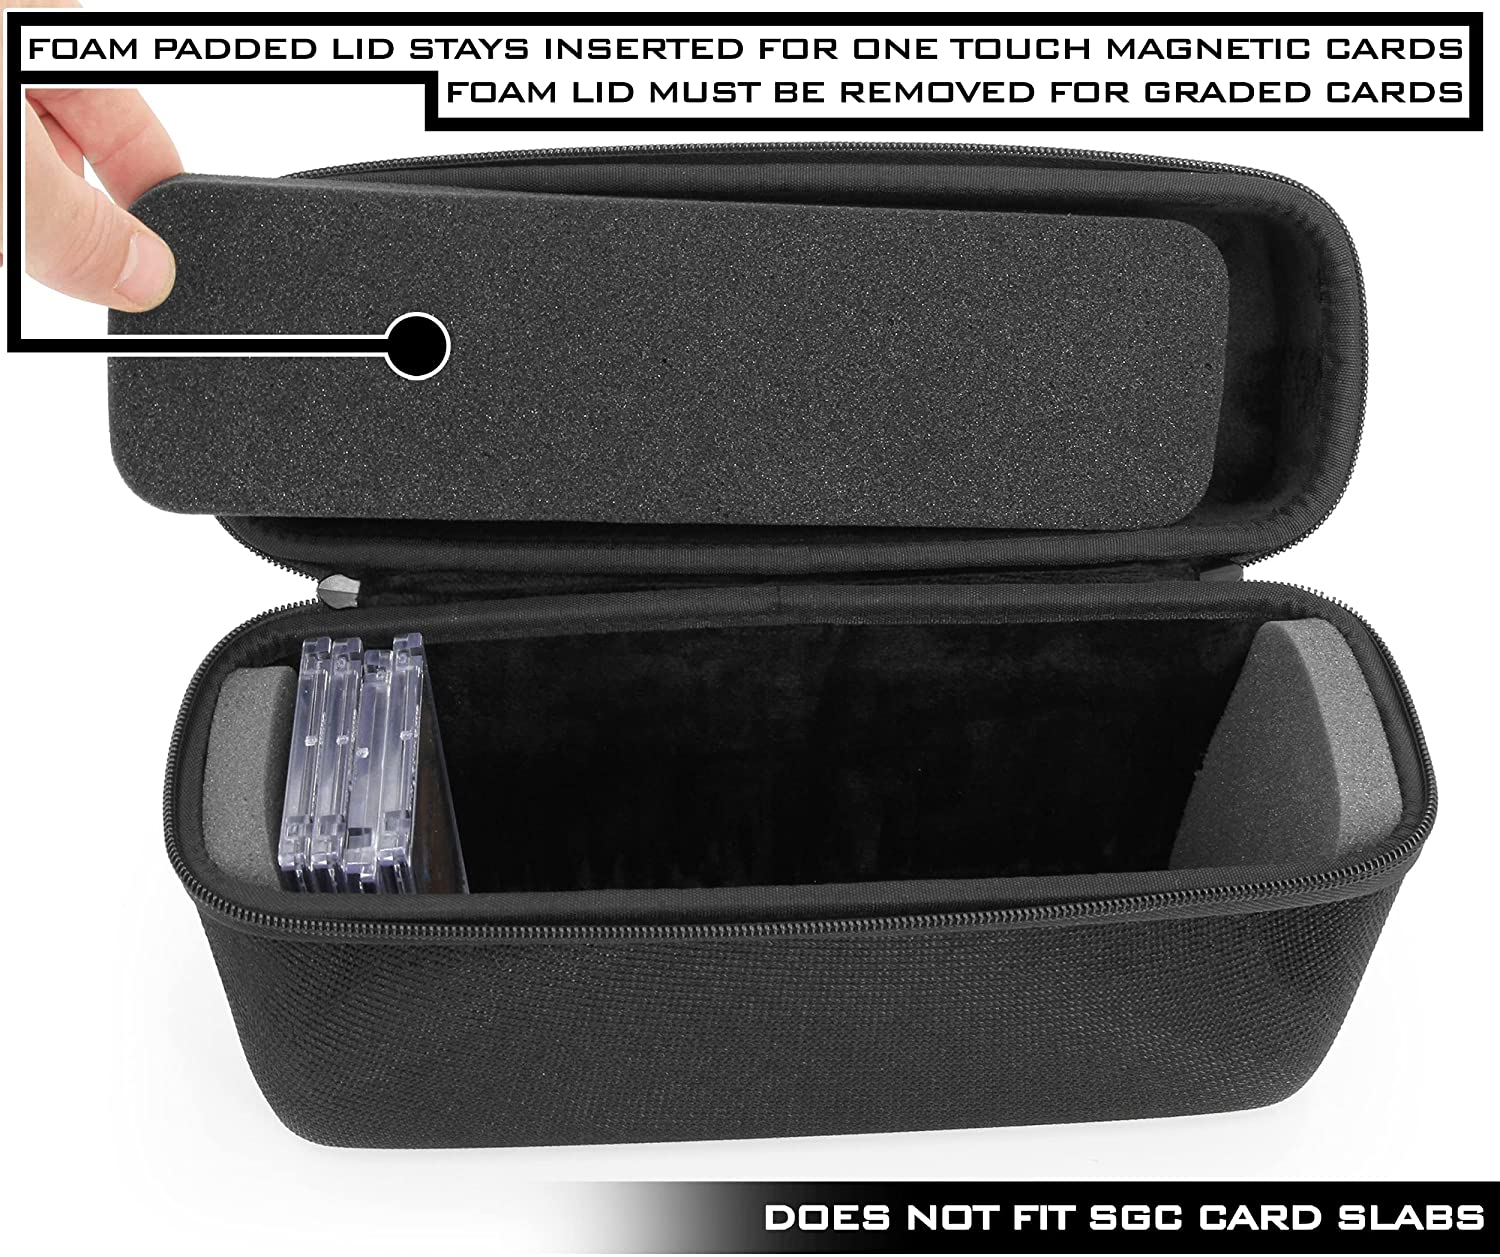 Casematix Graded Card Storage Box Case Fits 120+ BGS PSA FGS Graded Sports Cards and Toploaders - Waterproof Case with 4 Foam Slots